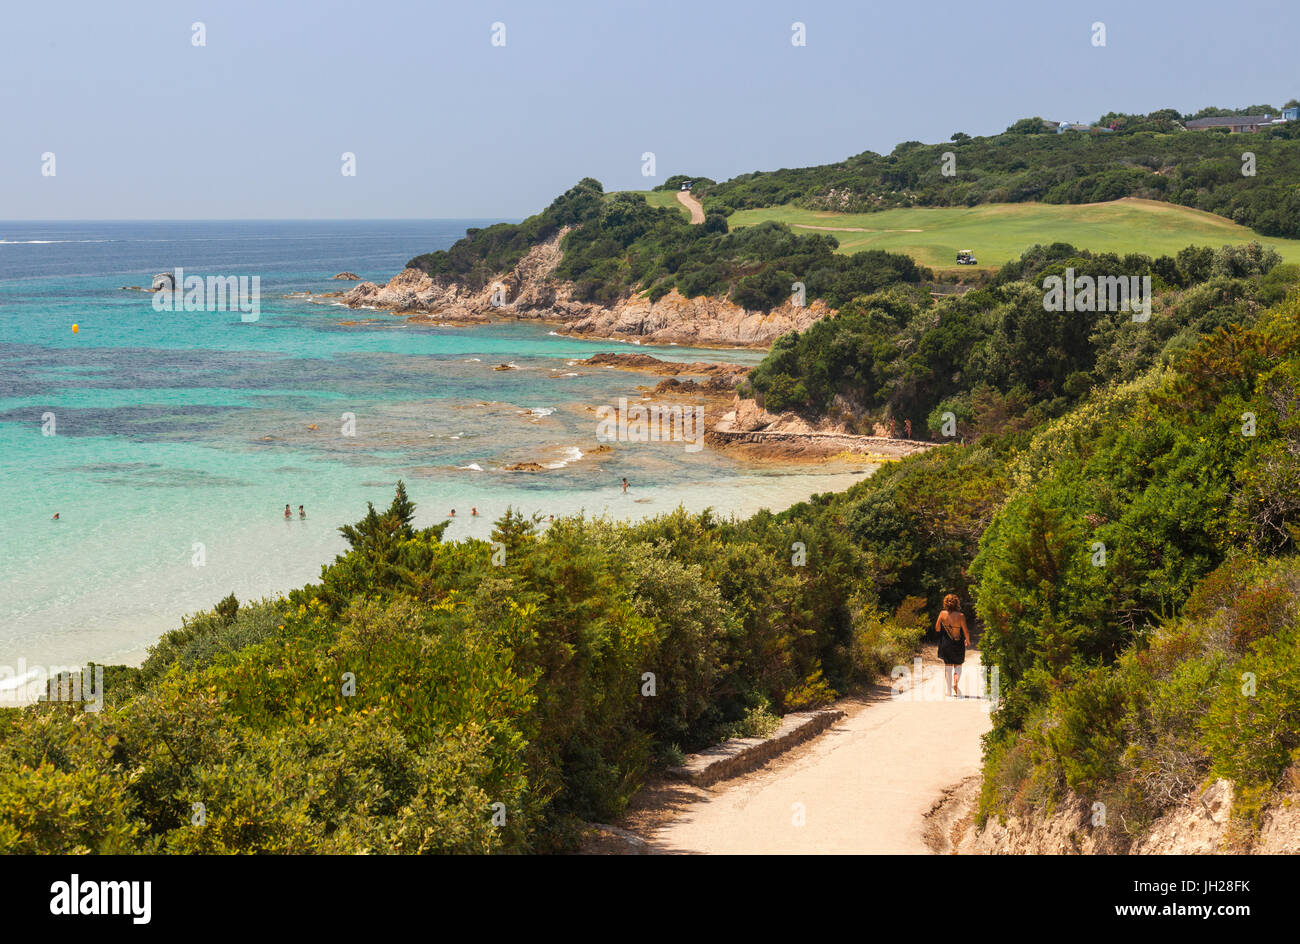 Summer view of the turquoise sea and the golf course on the promontory, Sperone, Bonifacio, South Corsica, France, Mediterranean Stock Photo